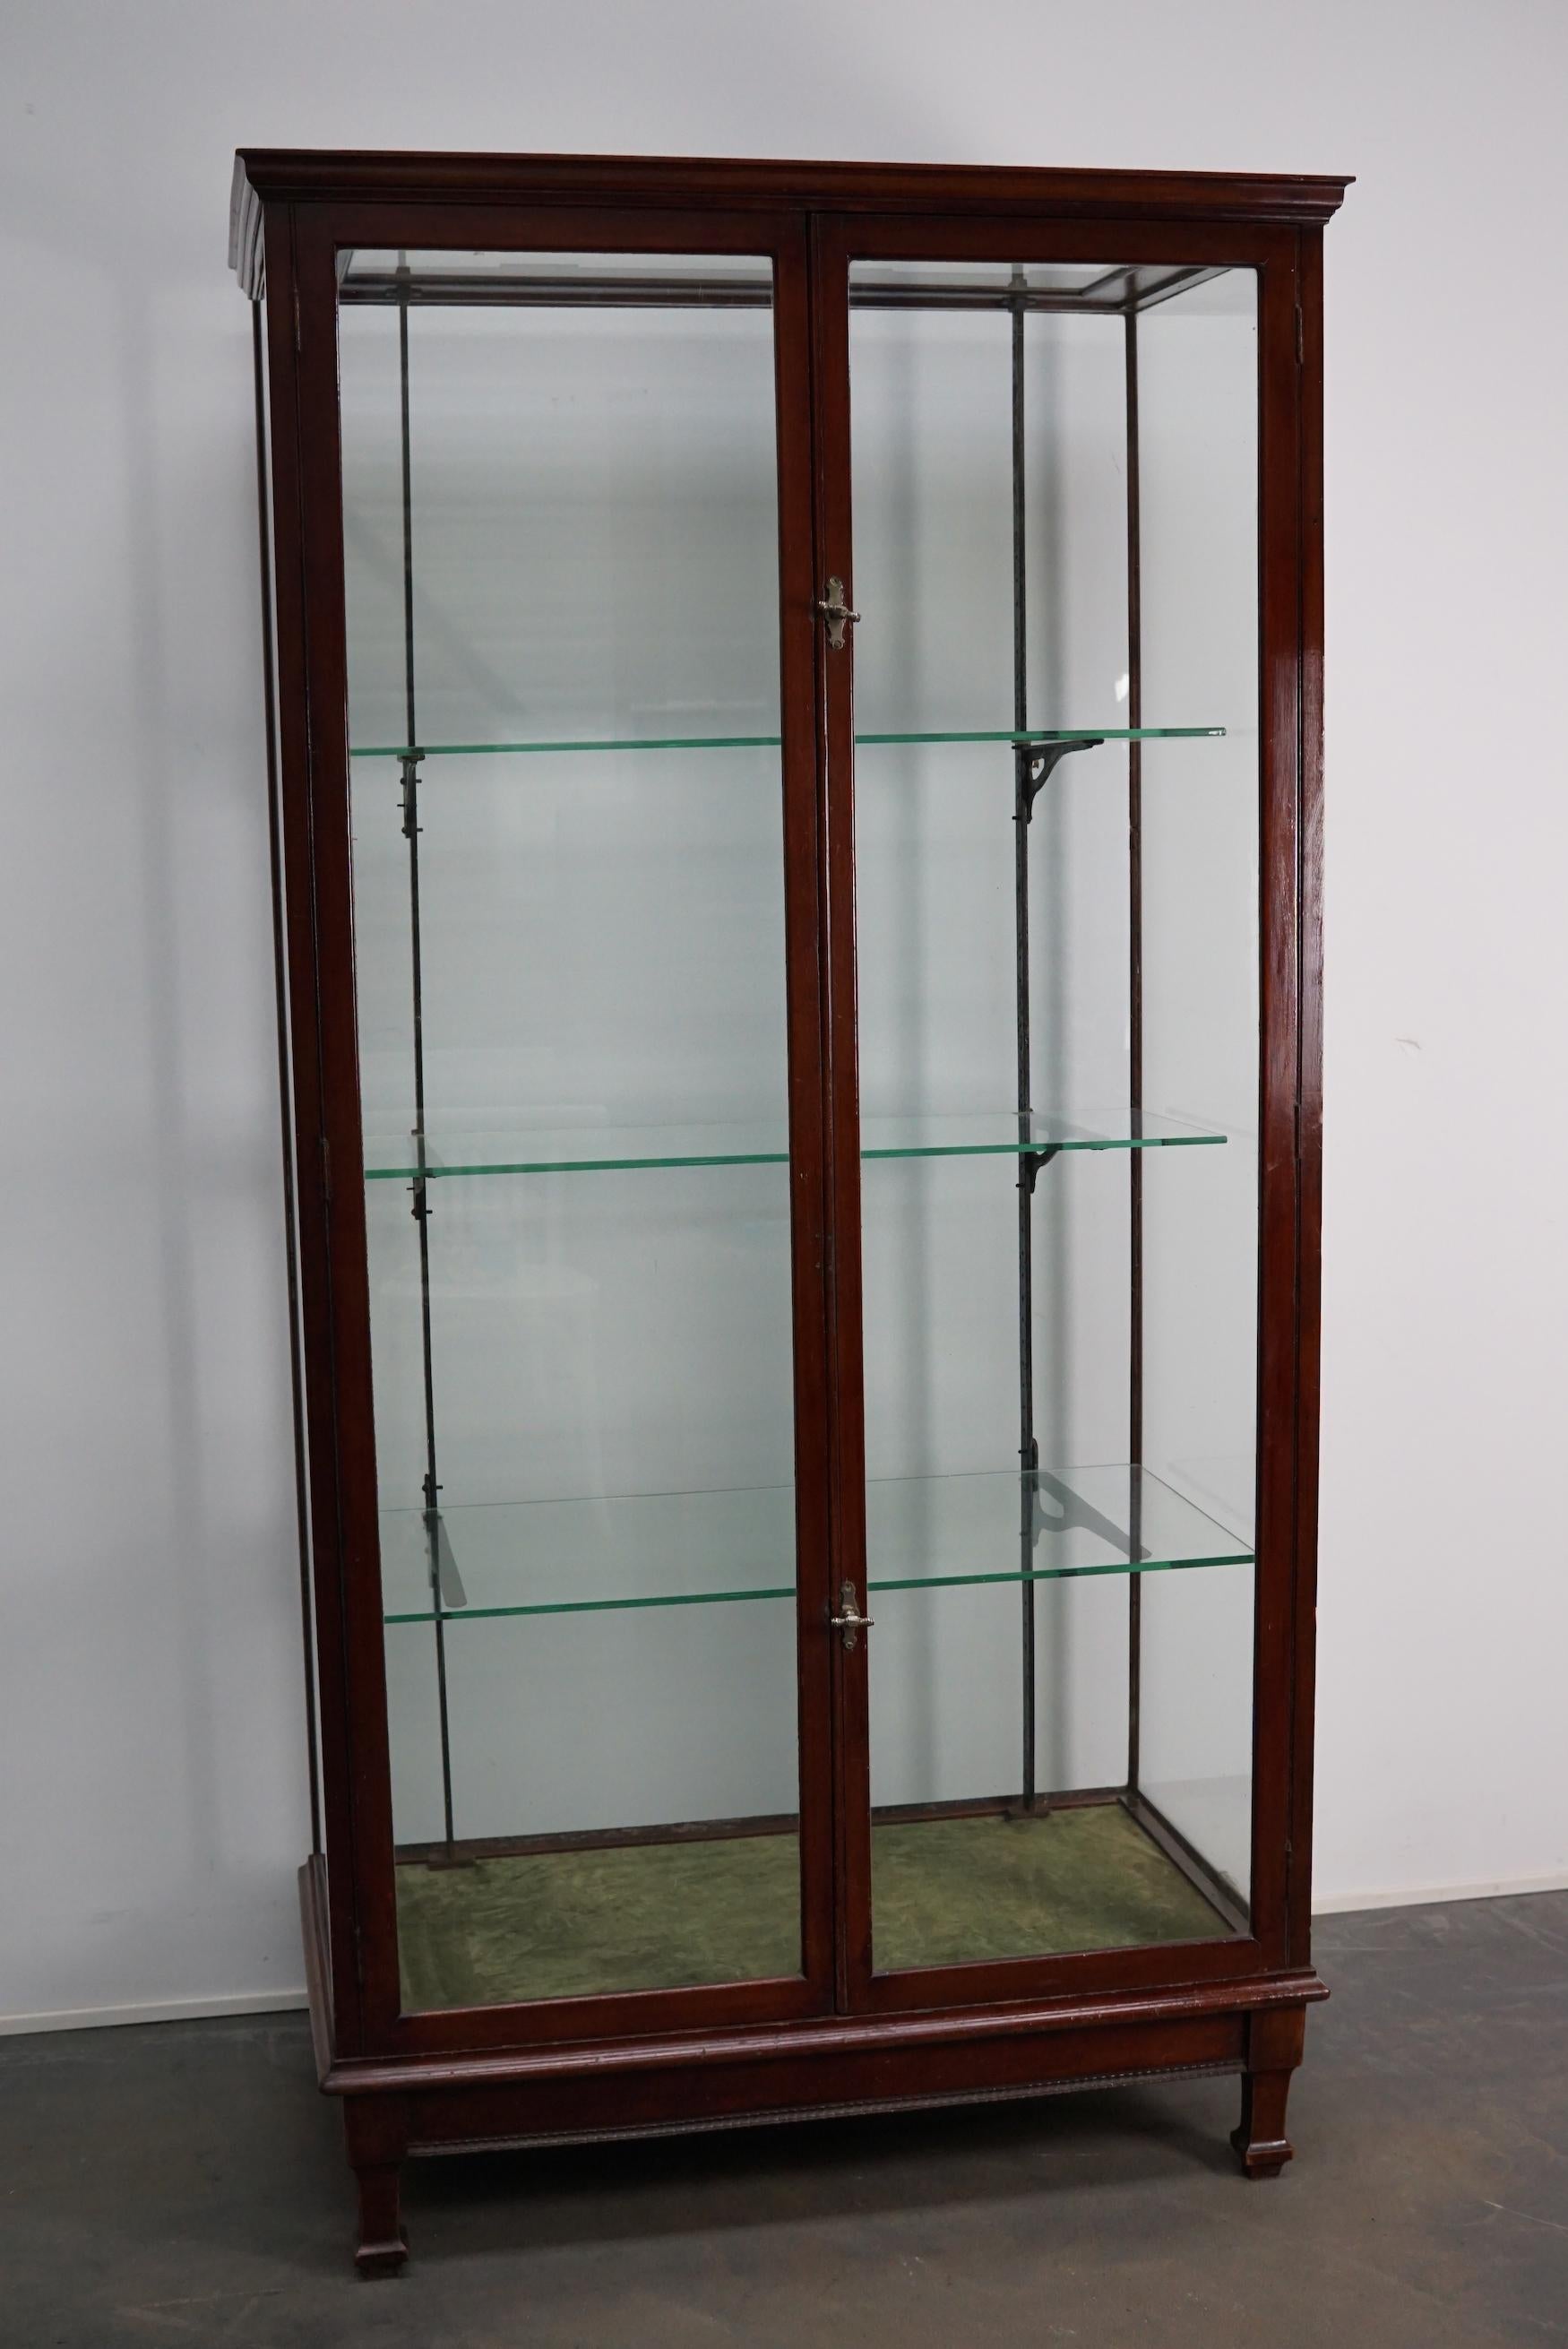 A museum quality Victorian mahogany display cabinet. This outstanding large cabinet has two glass doors fitted with original knob handles. It features three shelves on cast iron shelve holders. The floor is covered with green velvet.